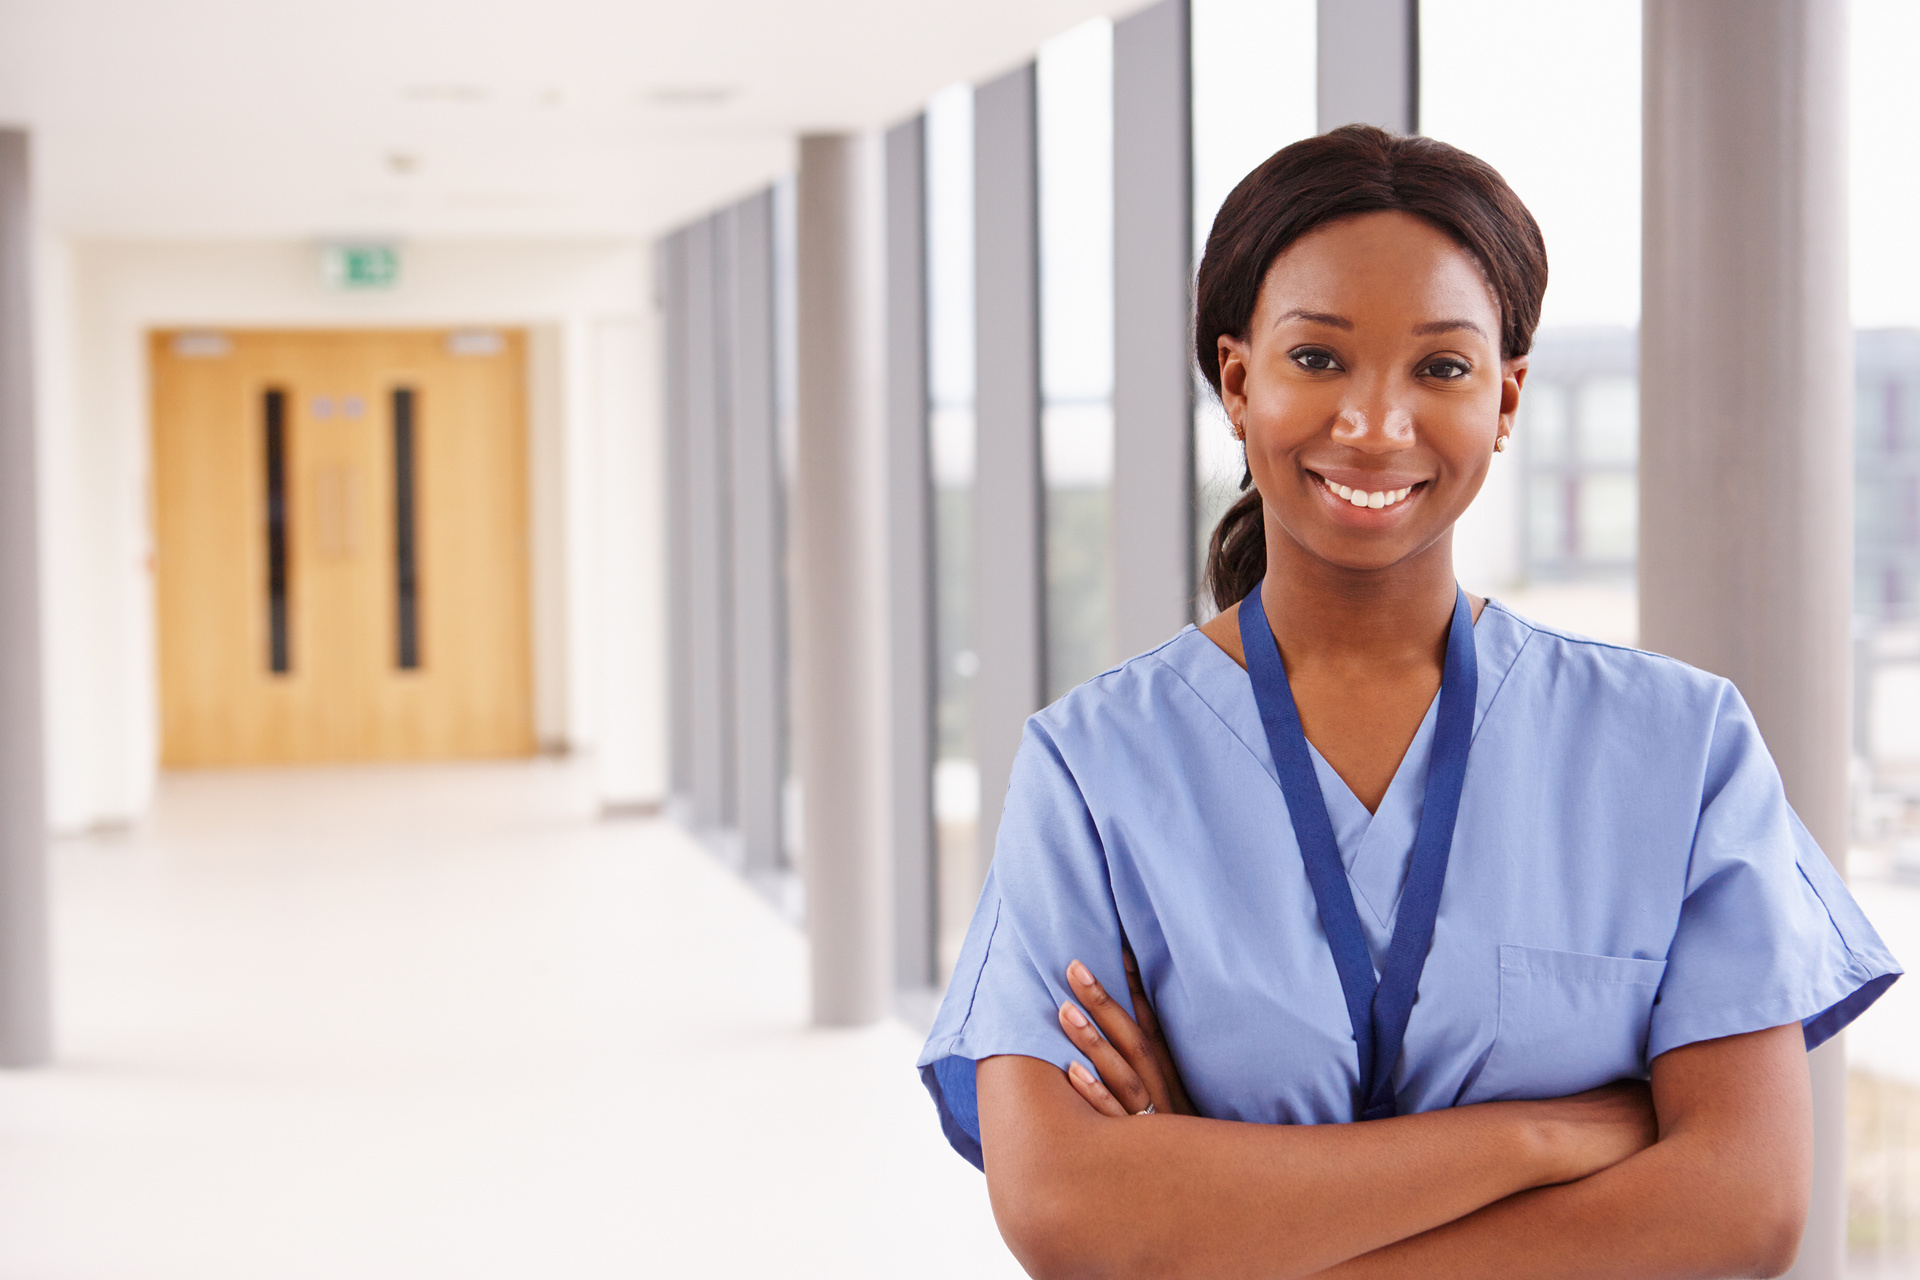 Top 10 Skills Nursing Students Need to Succeed Today